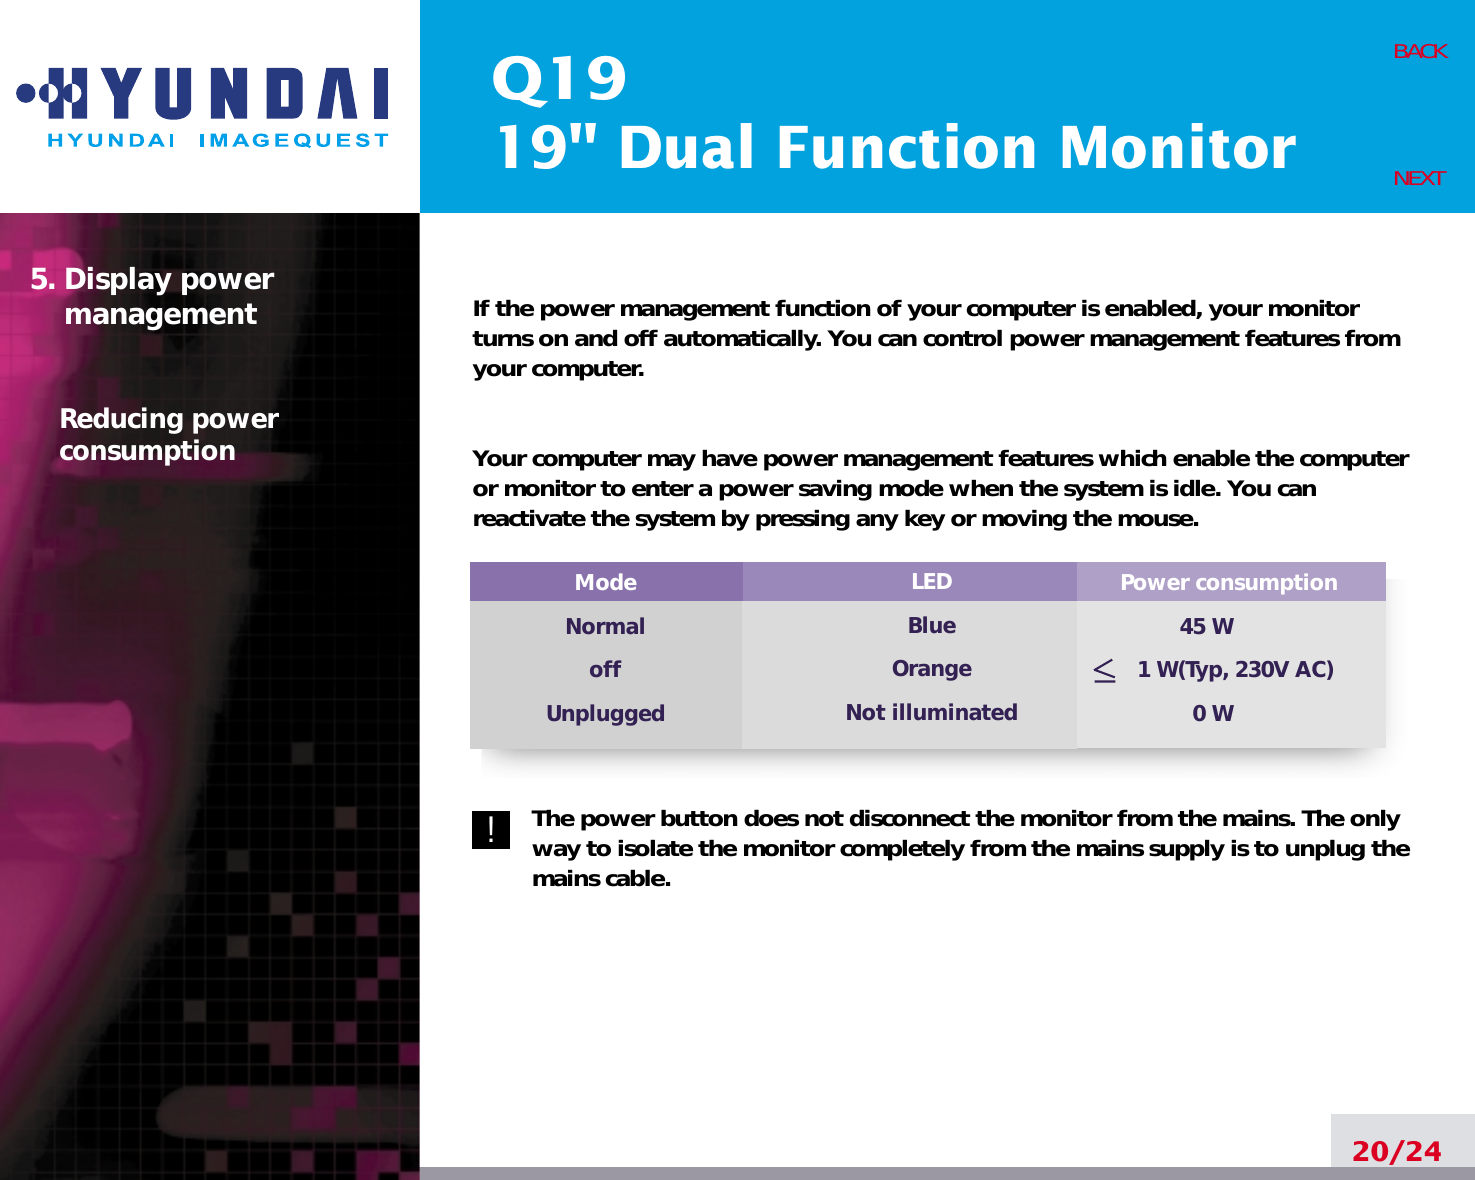 Q1919&quot; Dual Function MonitorIf the power management function of your computer is enabled, your monitorturns on and off automatically. You can control power management features fromyour computer.Your computer may have power management features which enable the computeror monitor to enter a power saving mode when the system is idle. You canreactivate the system by pressing any key or moving the mouse.The power button does not disconnect the monitor from the mains. The onlyway to isolate the monitor completely from the mains supply is to unplug themains cable.20/24BACKNEXT5. Display power managementReducing powerconsumptionPower consumption45 W1 W(Typ, 230V AC)0 WModeNormaloffUnpluggedLEDBlueOrangeNot illuminated!